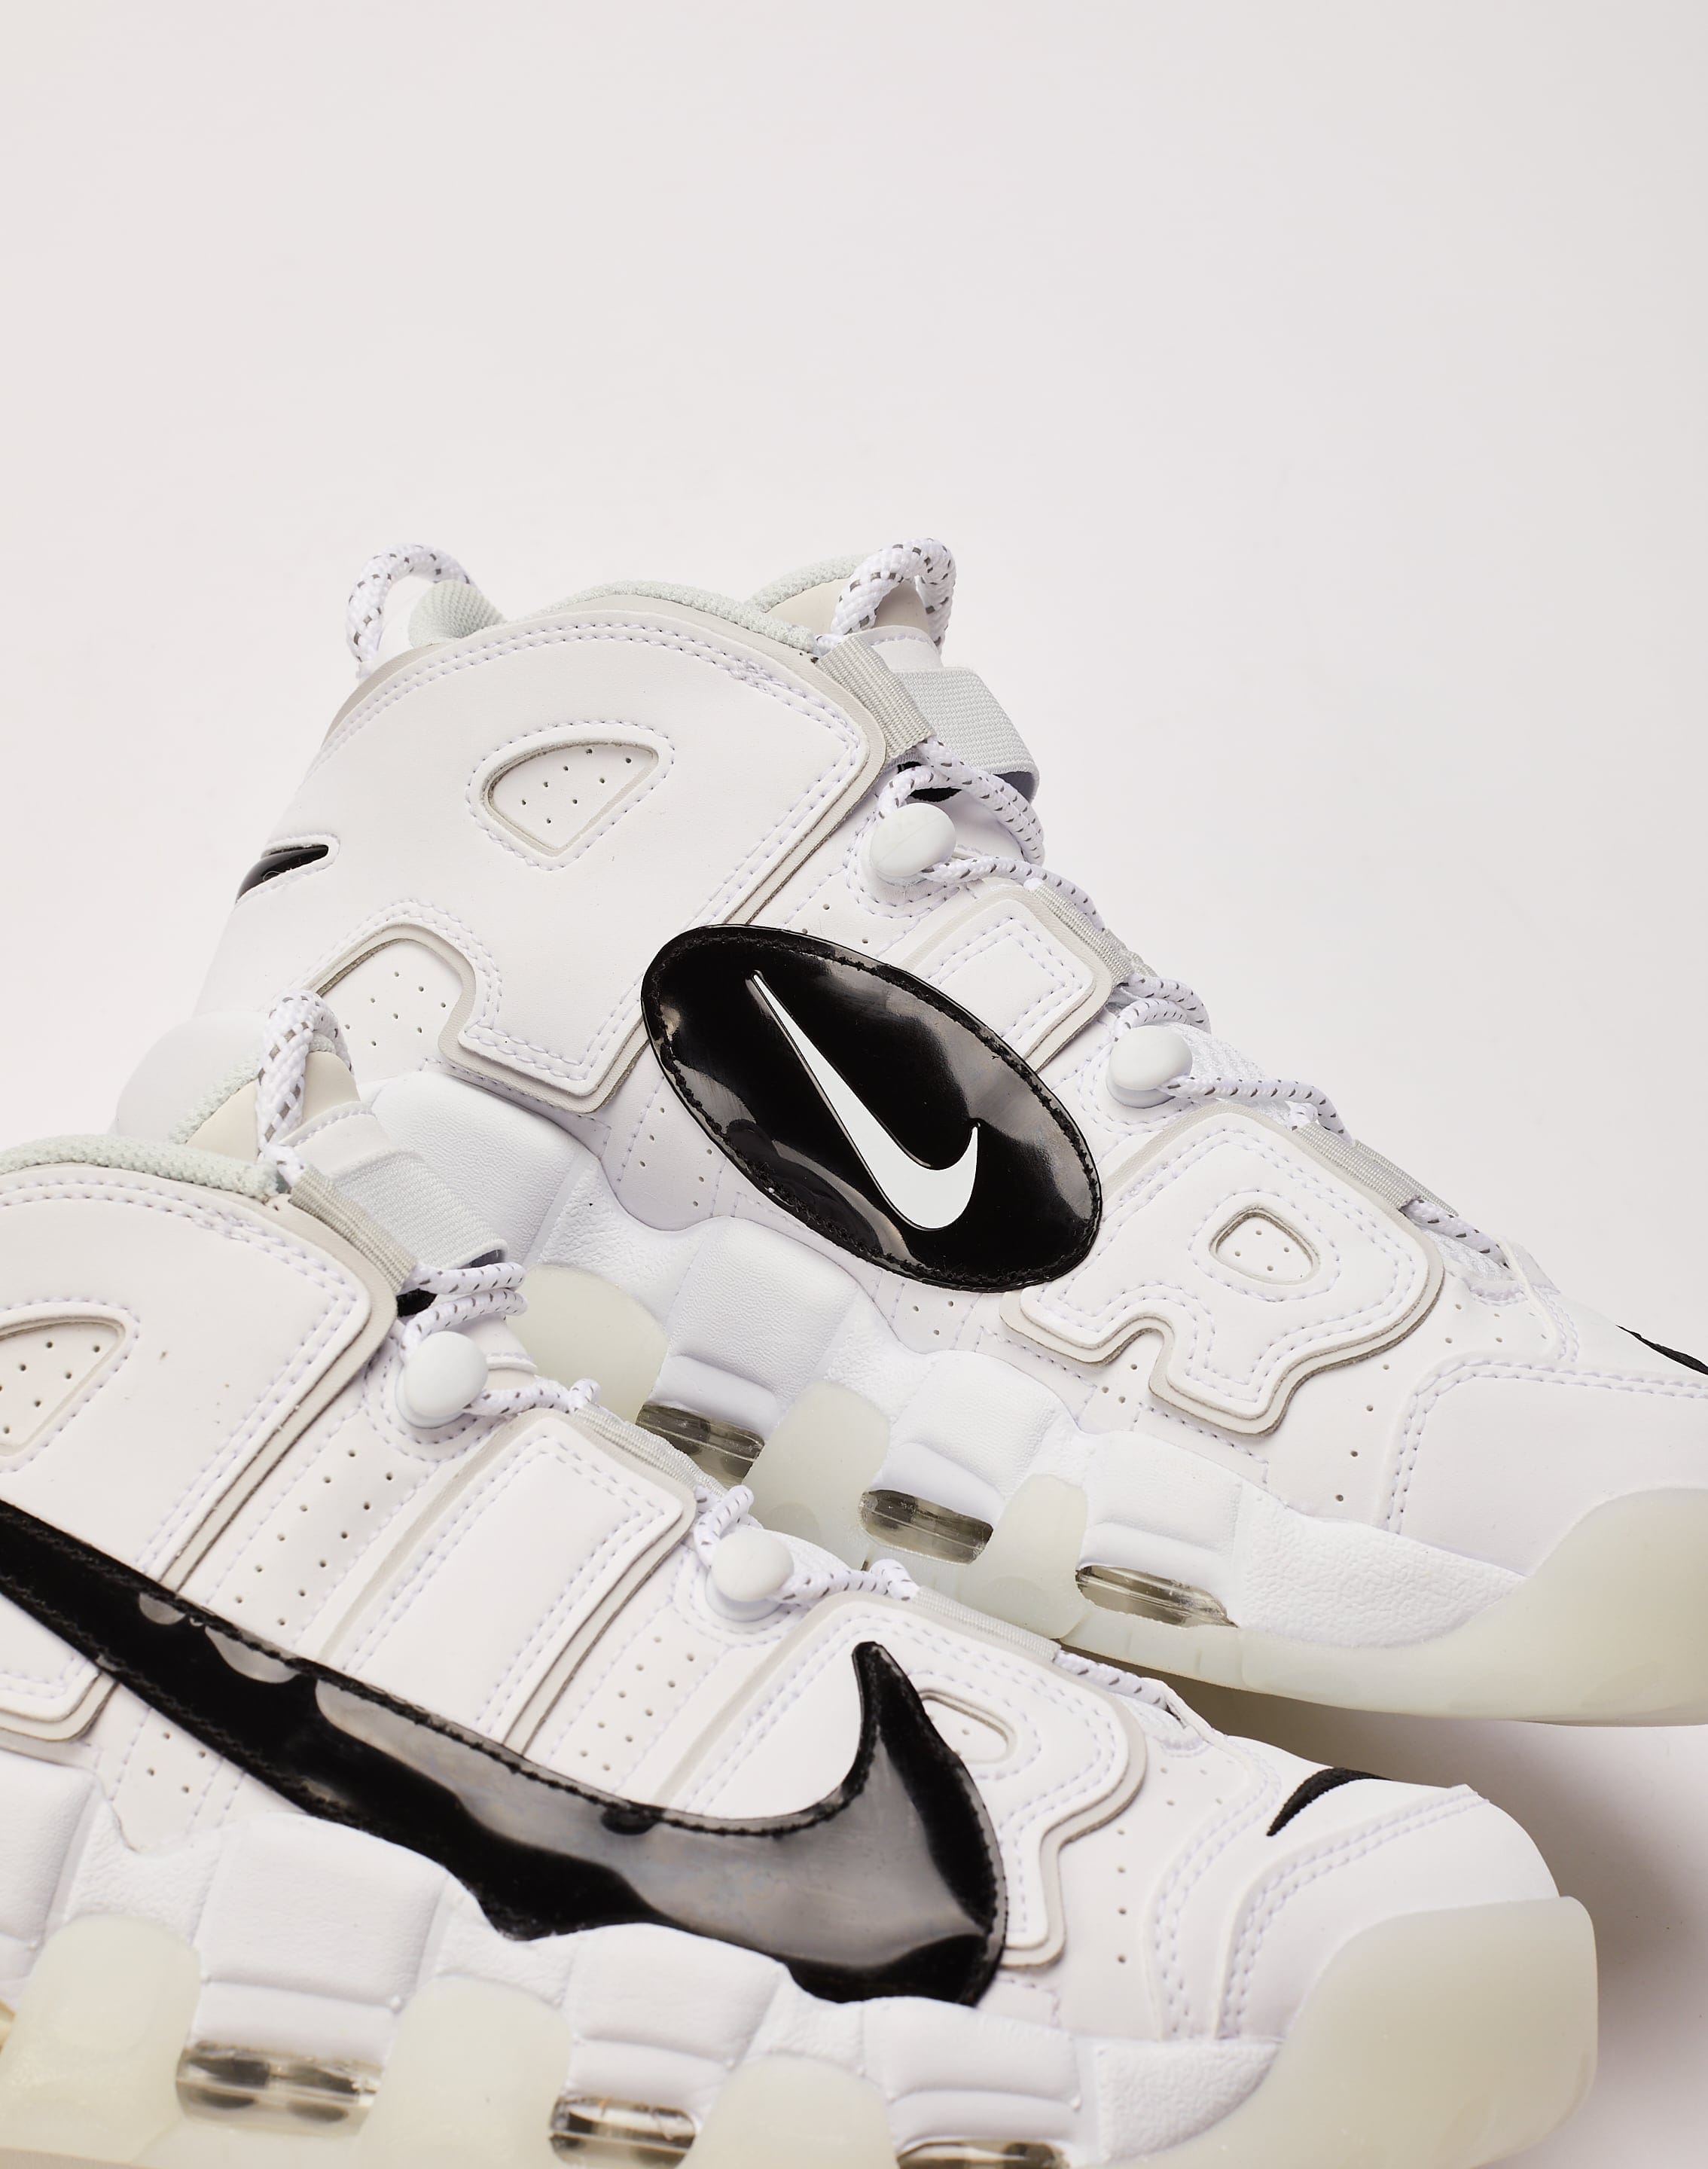 Another Look at the '96 Spurs-Inspired Nike Air Max Uptempo •